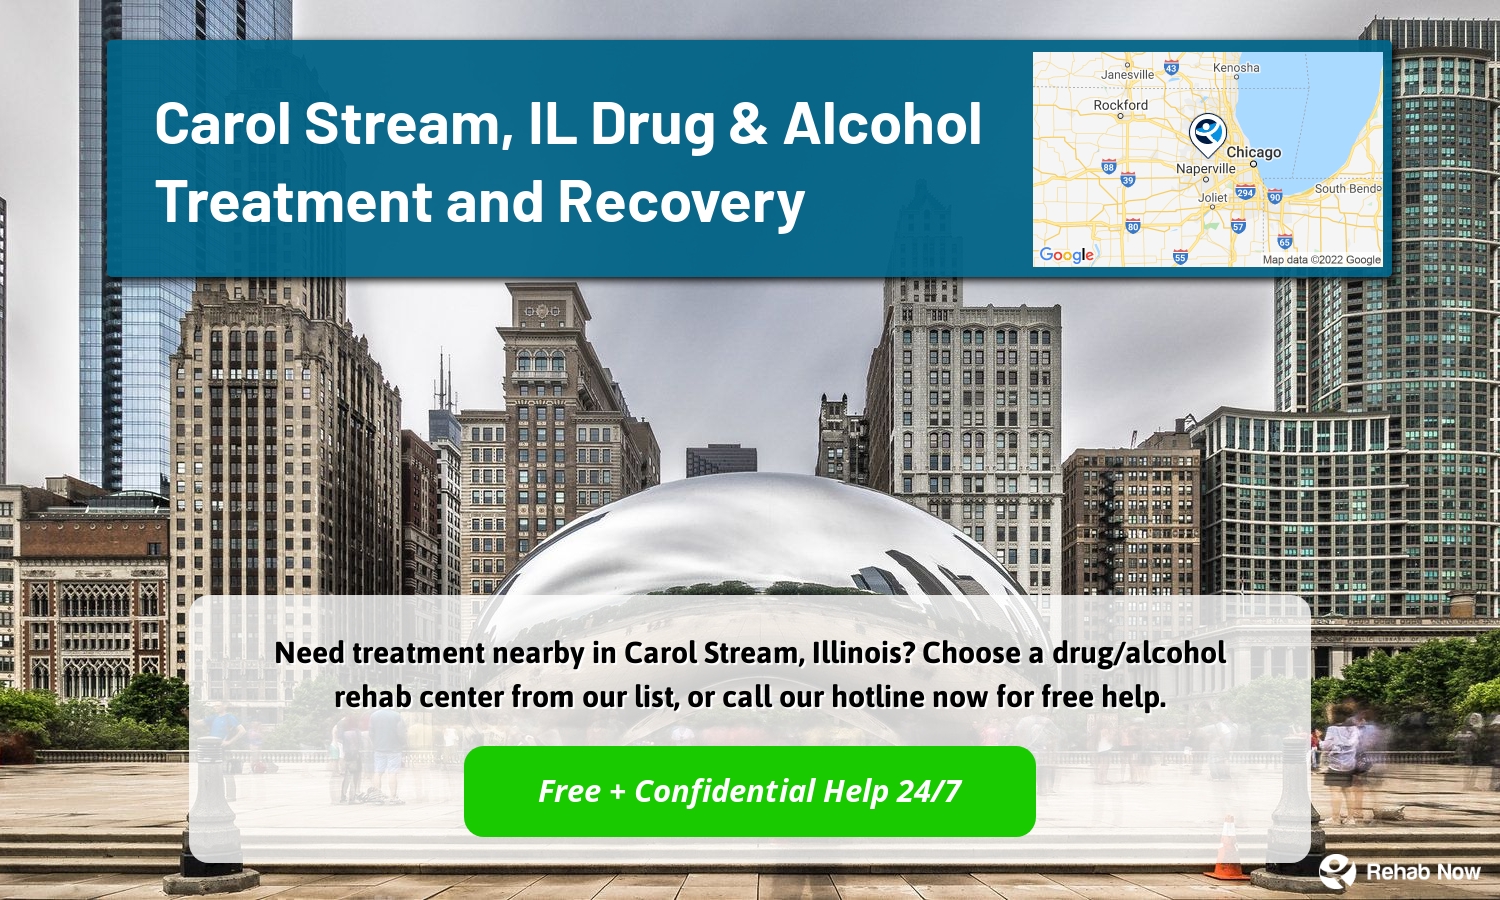 Need treatment nearby in Carol Stream, Illinois? Choose a drug/alcohol rehab center from our list, or call our hotline now for free help.